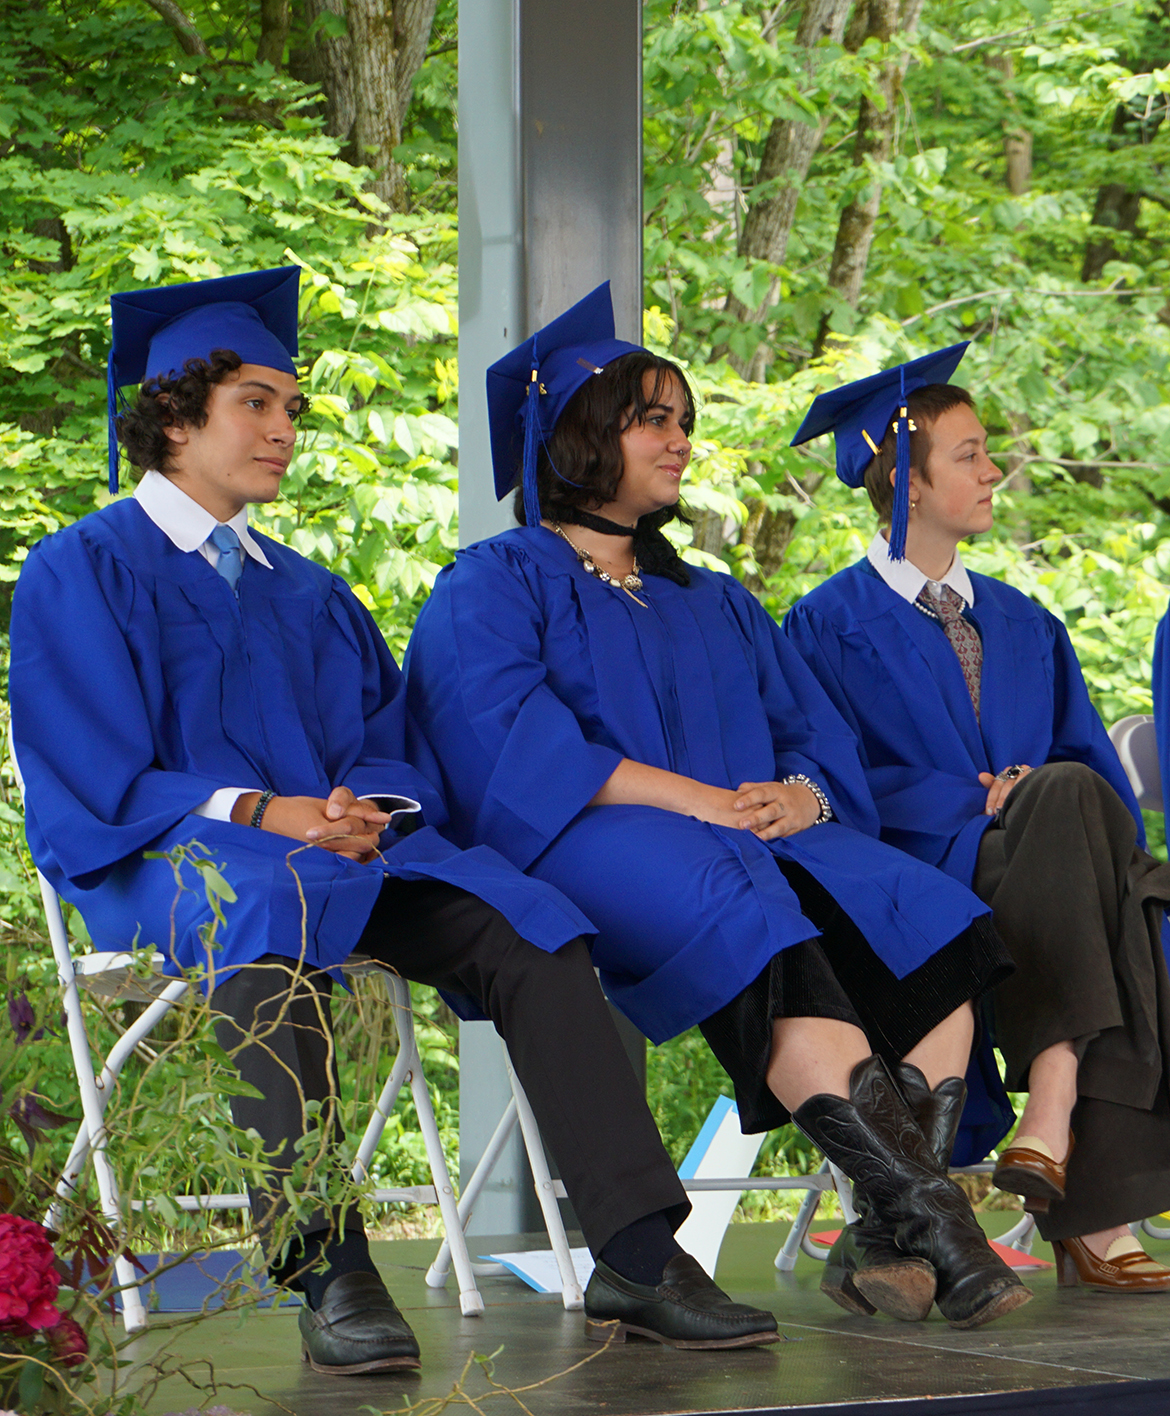 Three students - one male and two female - wearing blue graduation caps and gowns seated on a stage beneath our open air pavilion